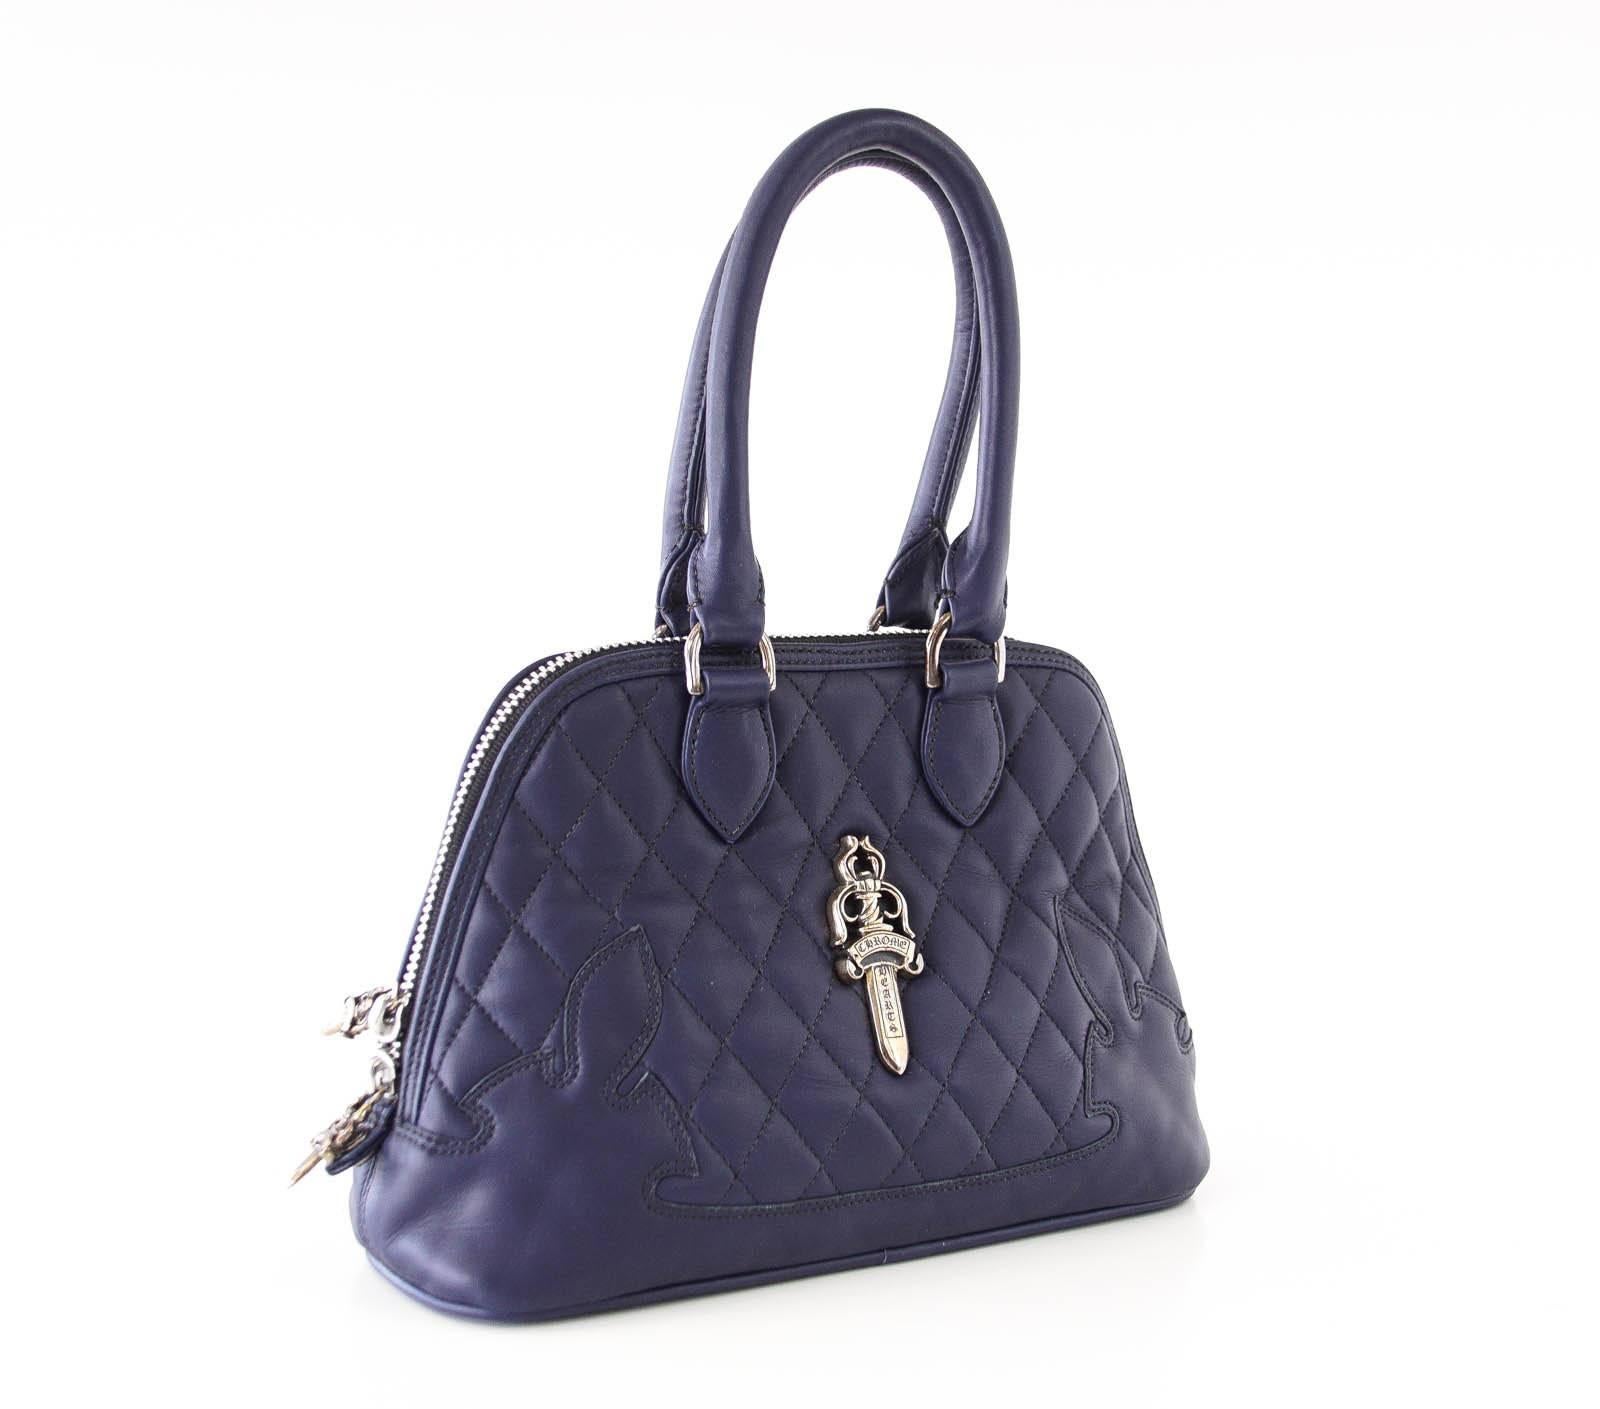 Guaranteed authentic Navy quilted Chrome Hearts charming bag with stitched logo at corners.
Signature Silver logo plaque in front and rear embossed name.
Top zip with logo pull. All hardware is sterling silver.
Top rounded leather handles.
Interior